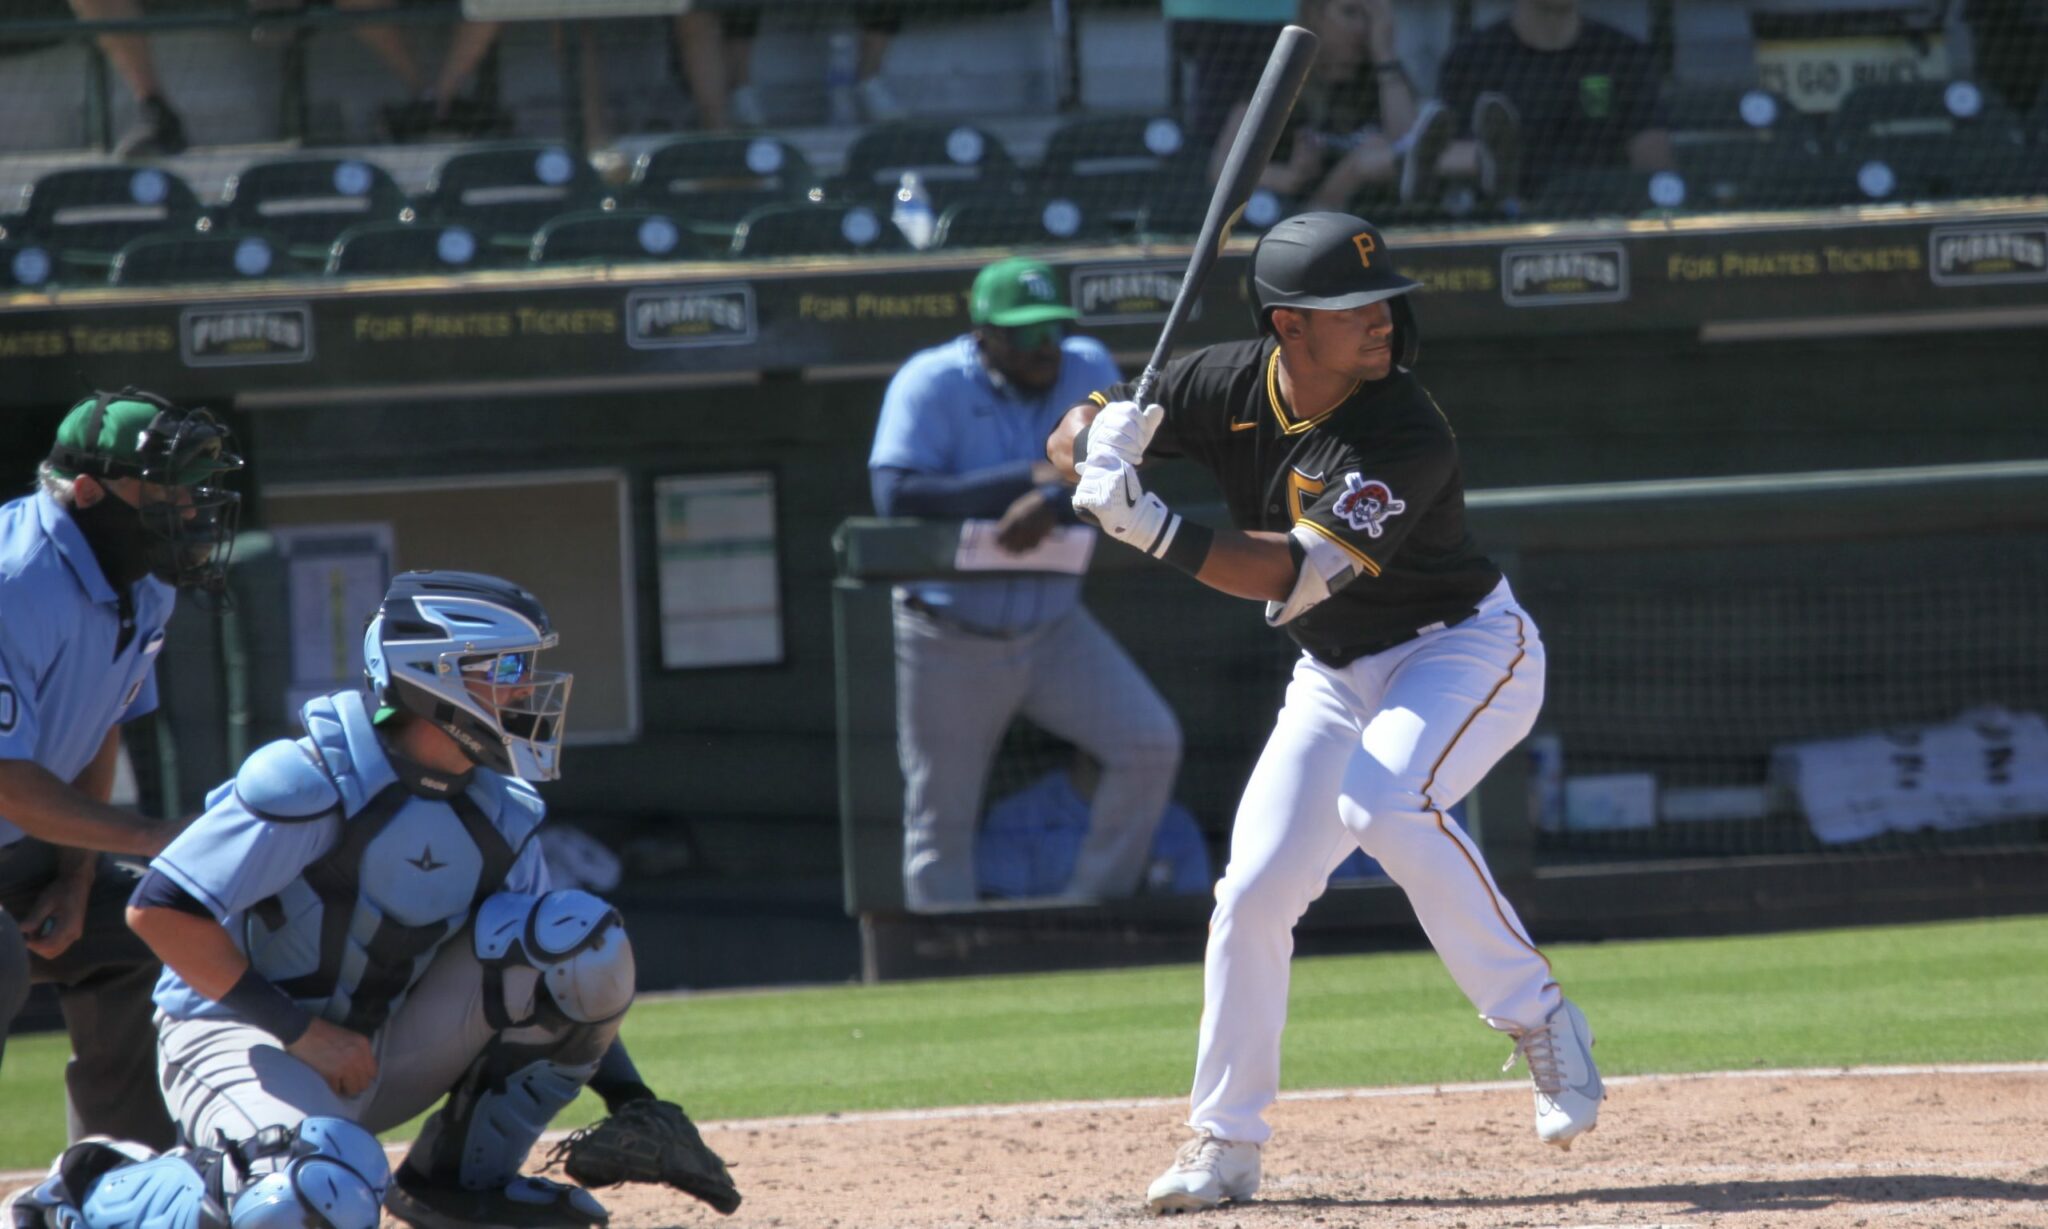 AFL Season Recap: Solid All Around Fall Season for the Pirates Prospects